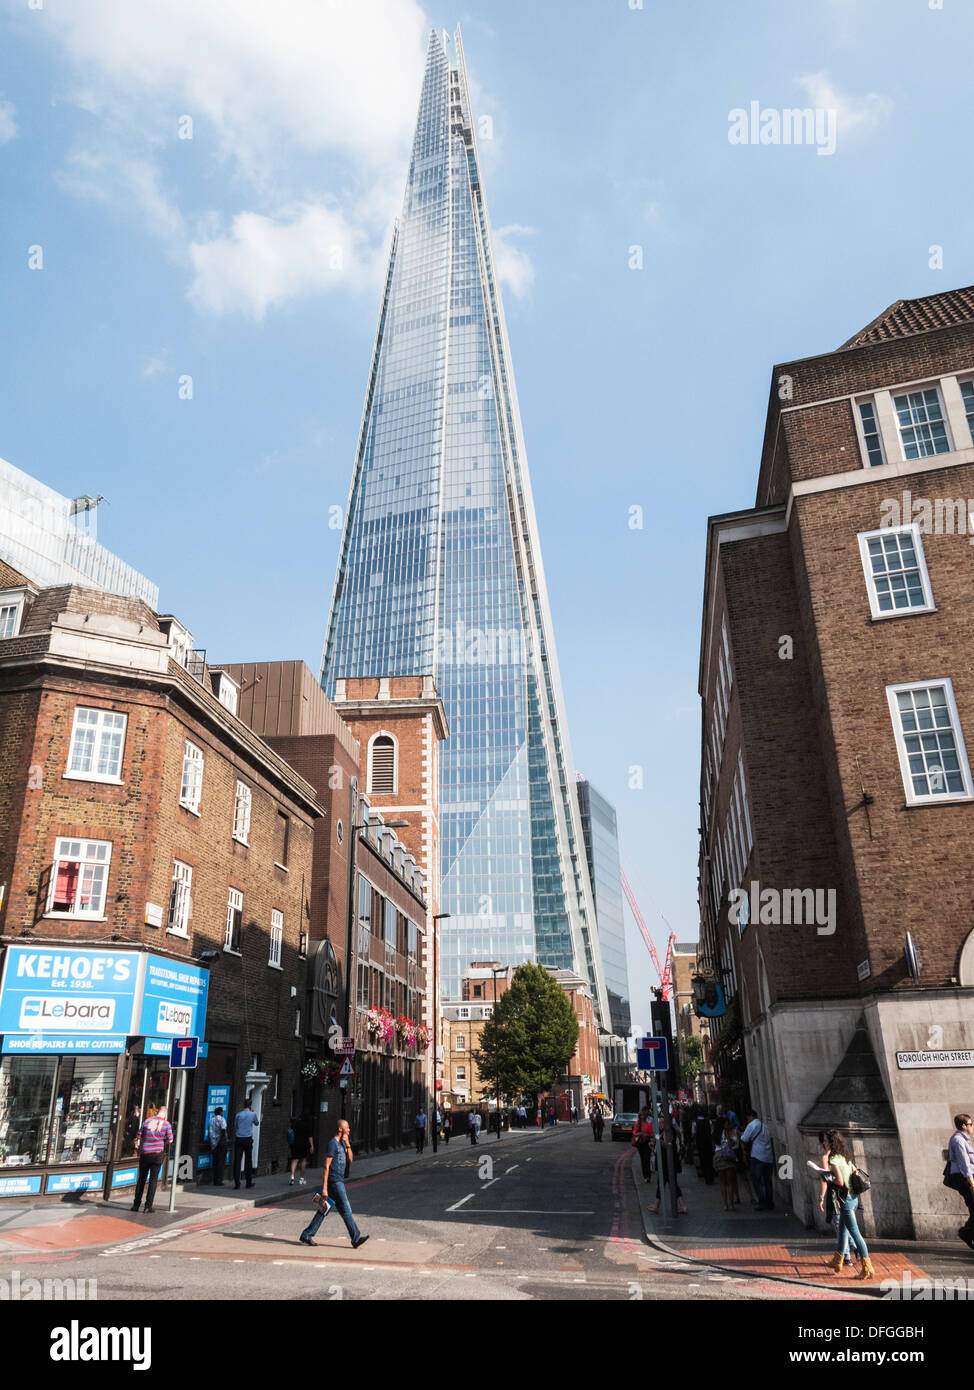 The Shard, an iconic 87 storey skyscraper near London Bridge, London, UK, at 306m (1,004 ft) the tallest building in the EU. Stock Photo